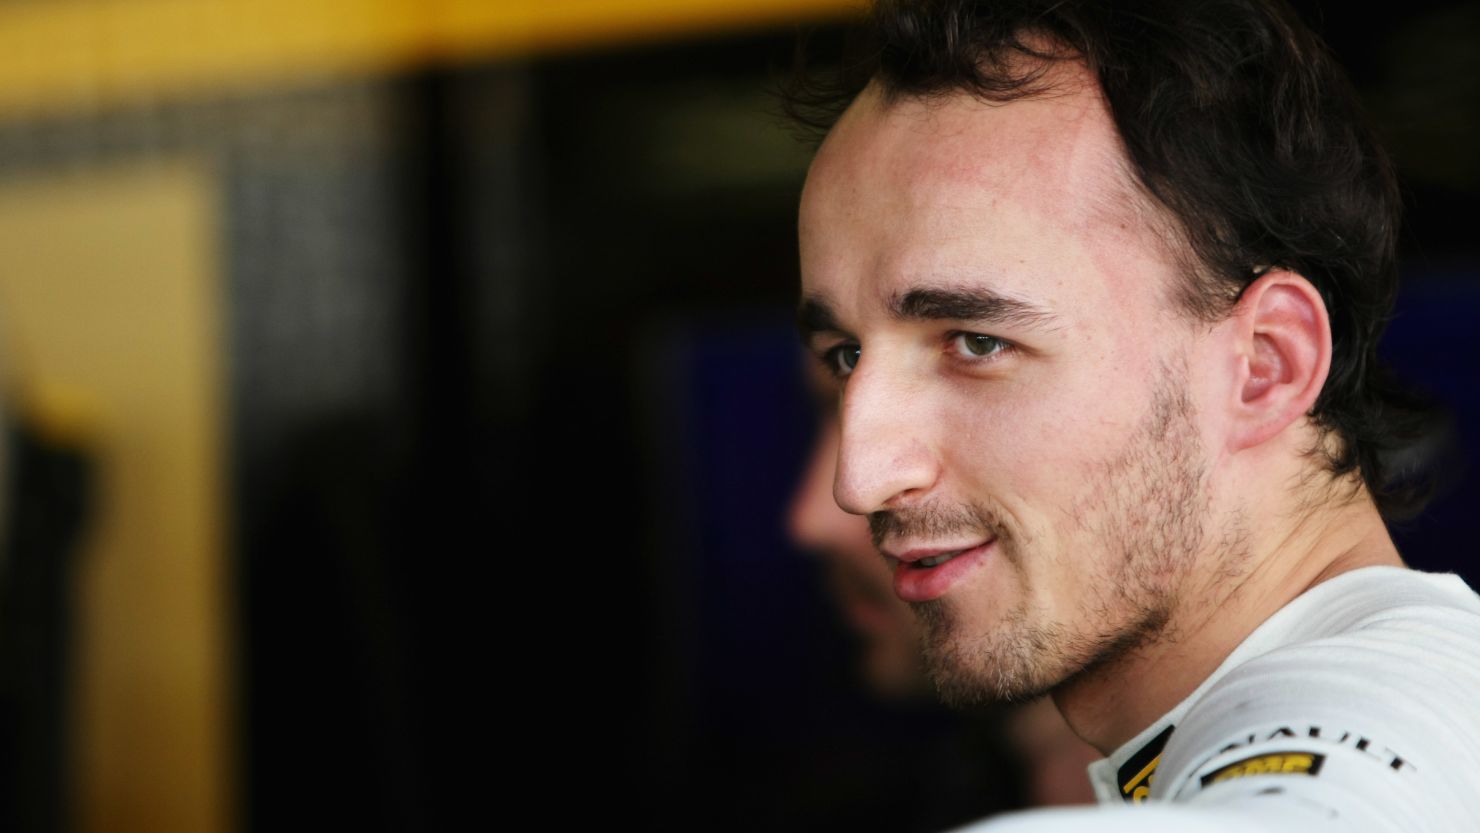 Robert Kubica has still not fully recovered from the serious arm injuries he sustained in a rallying crash.